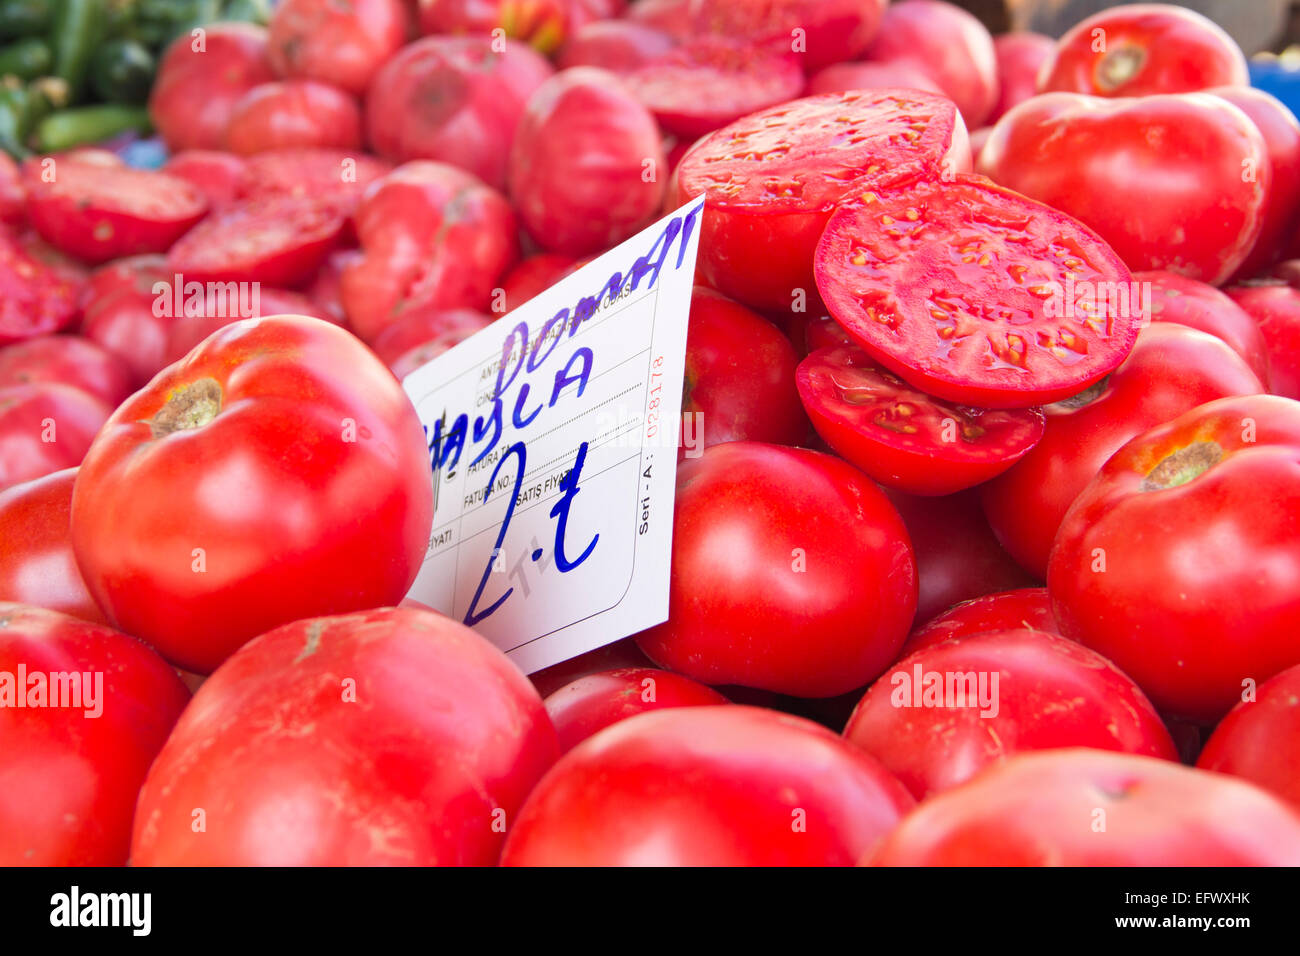 tomatoes on market with price tag Stock Photo